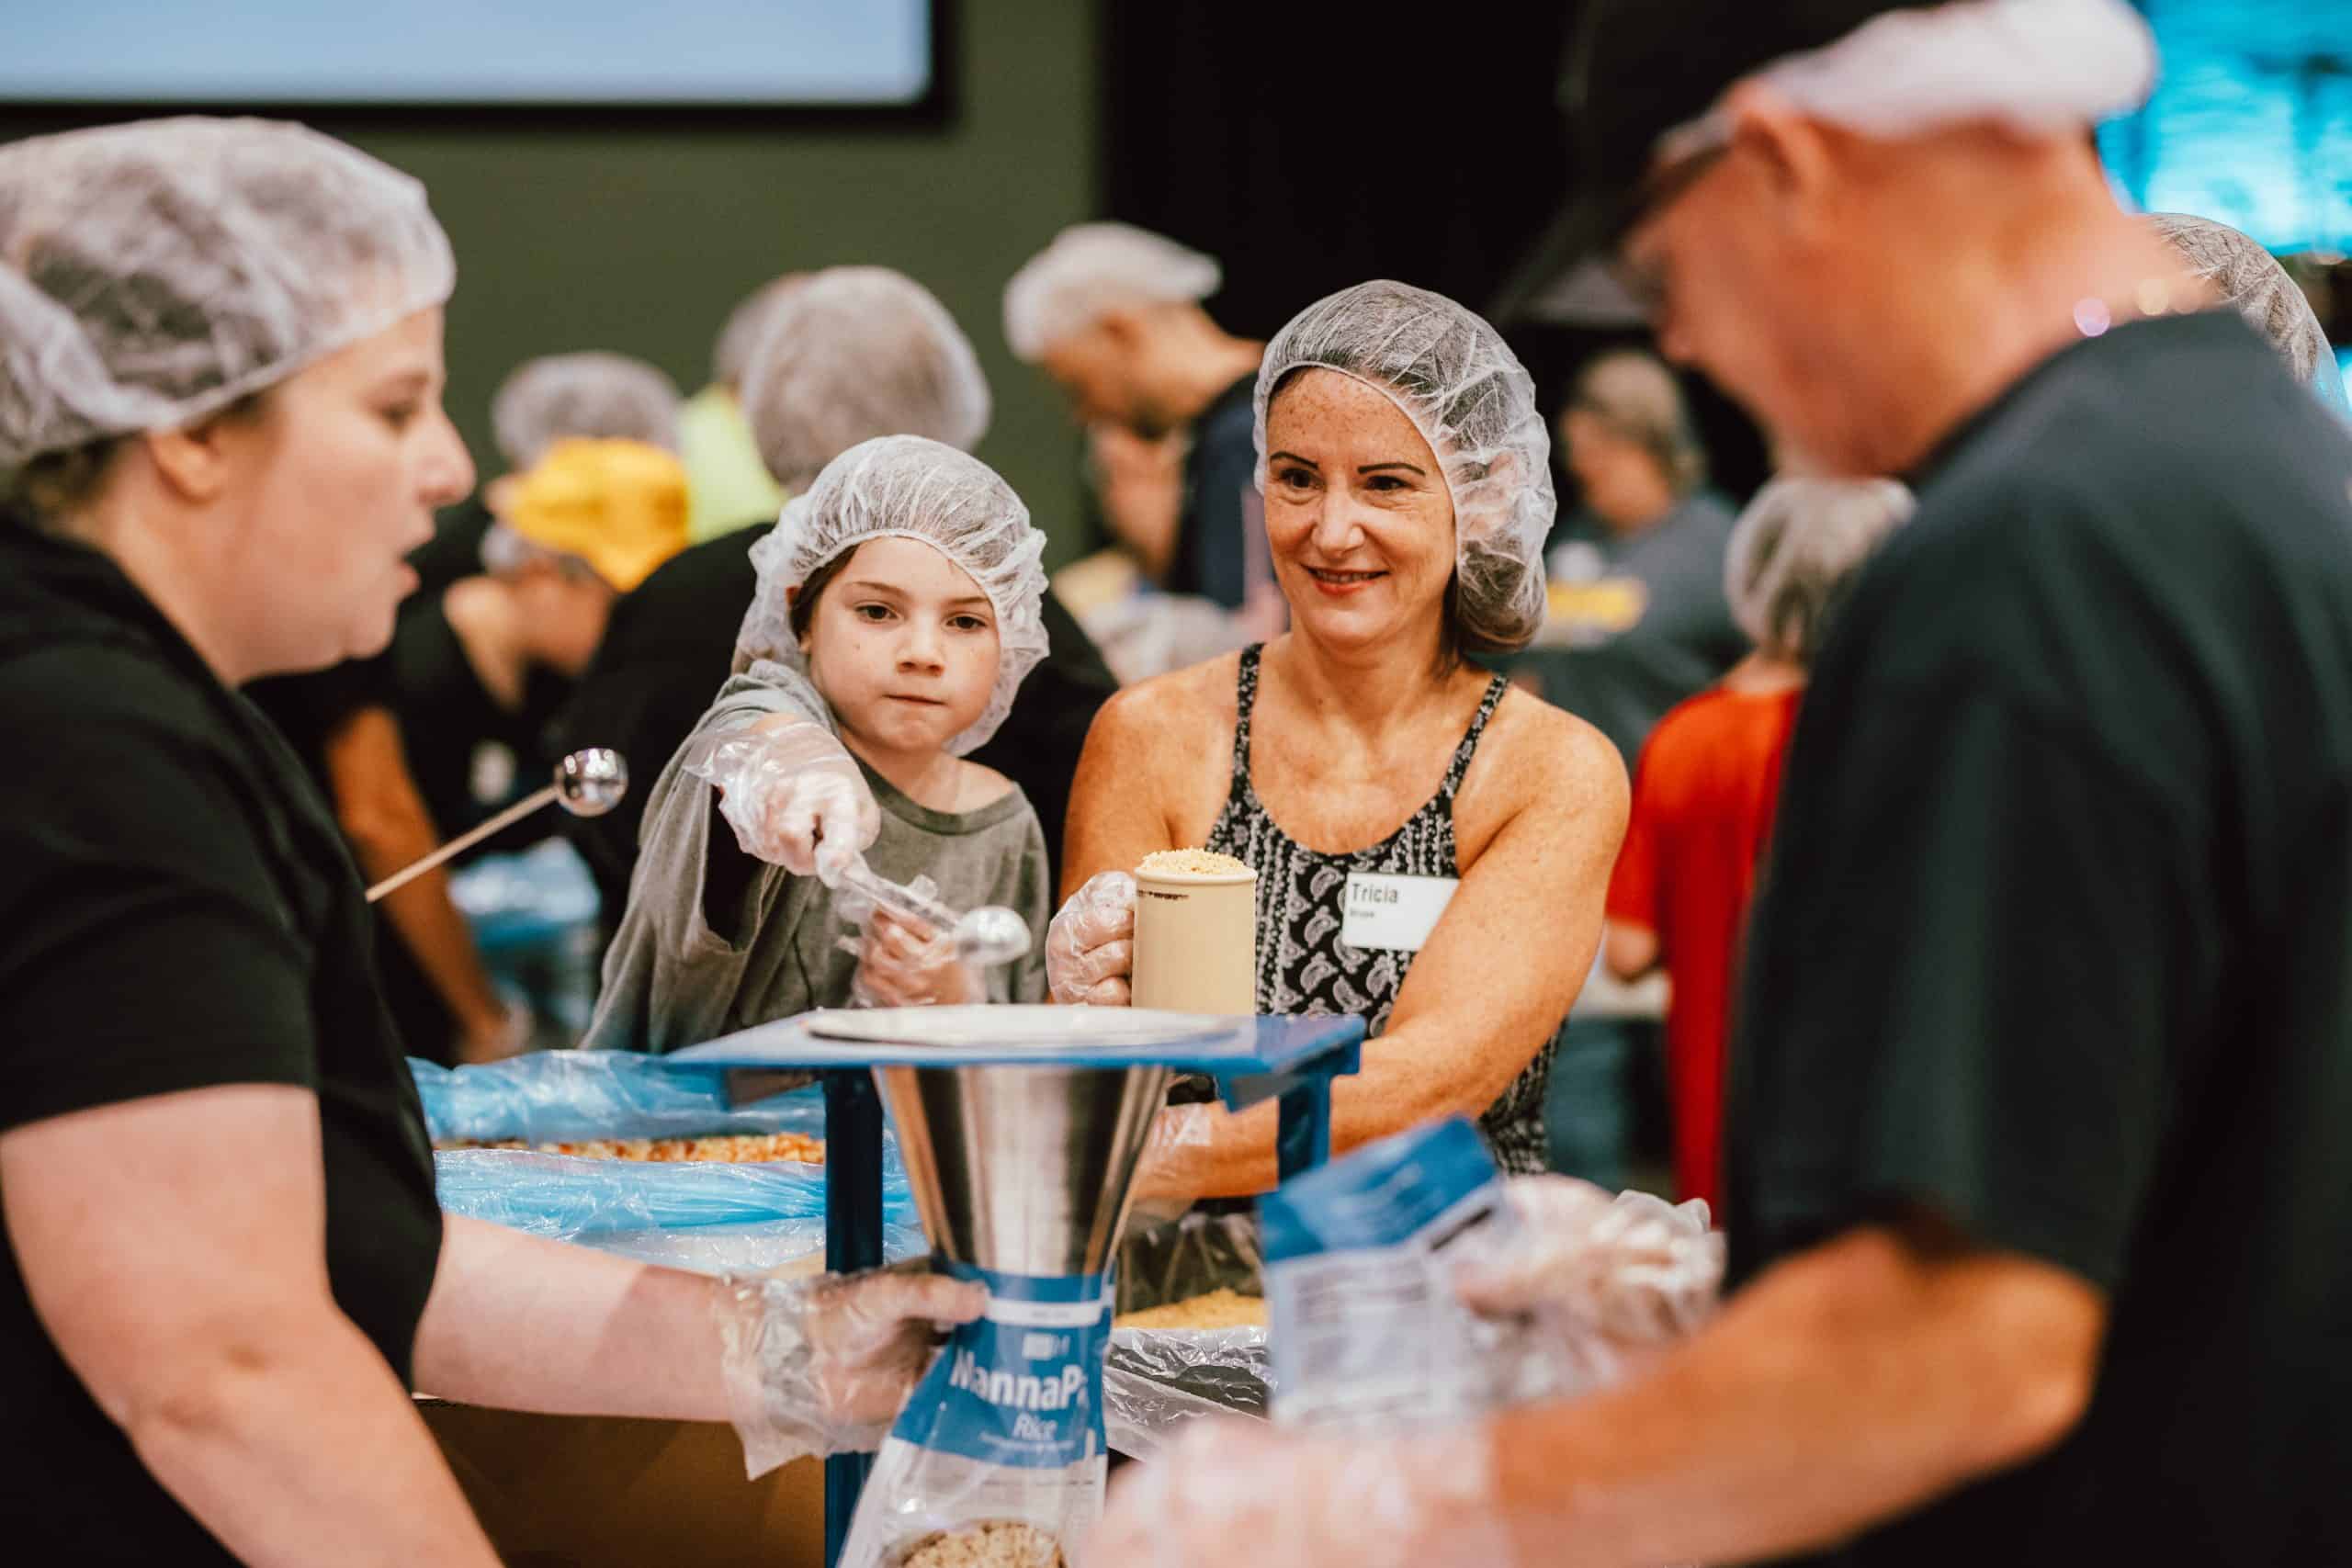 Feed my starving children photo